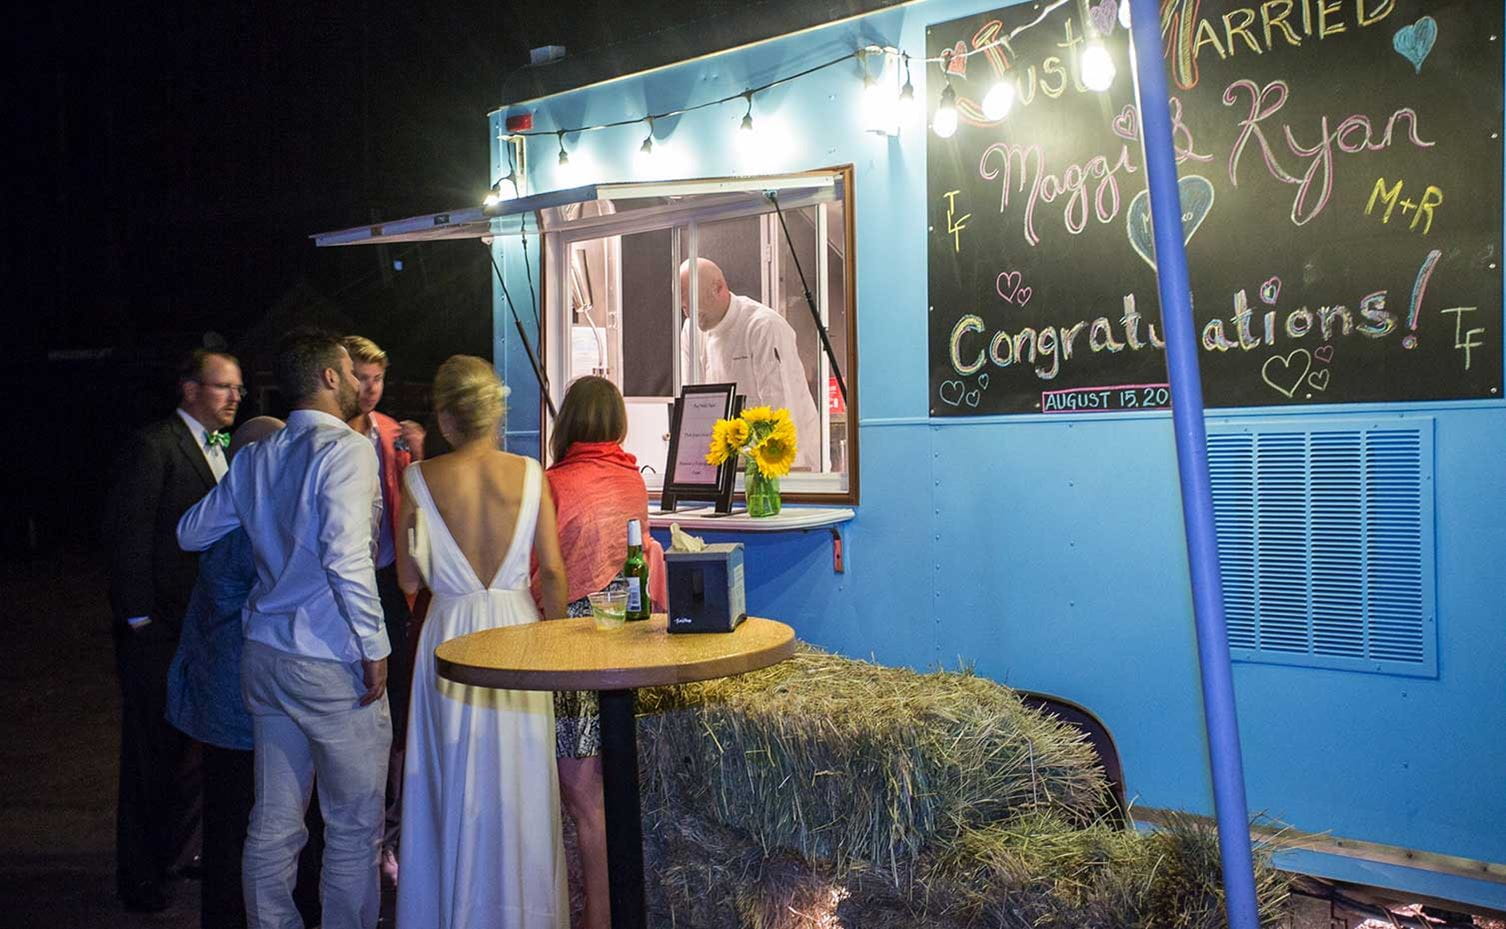 Weddings at The Sled - mobile dining cart